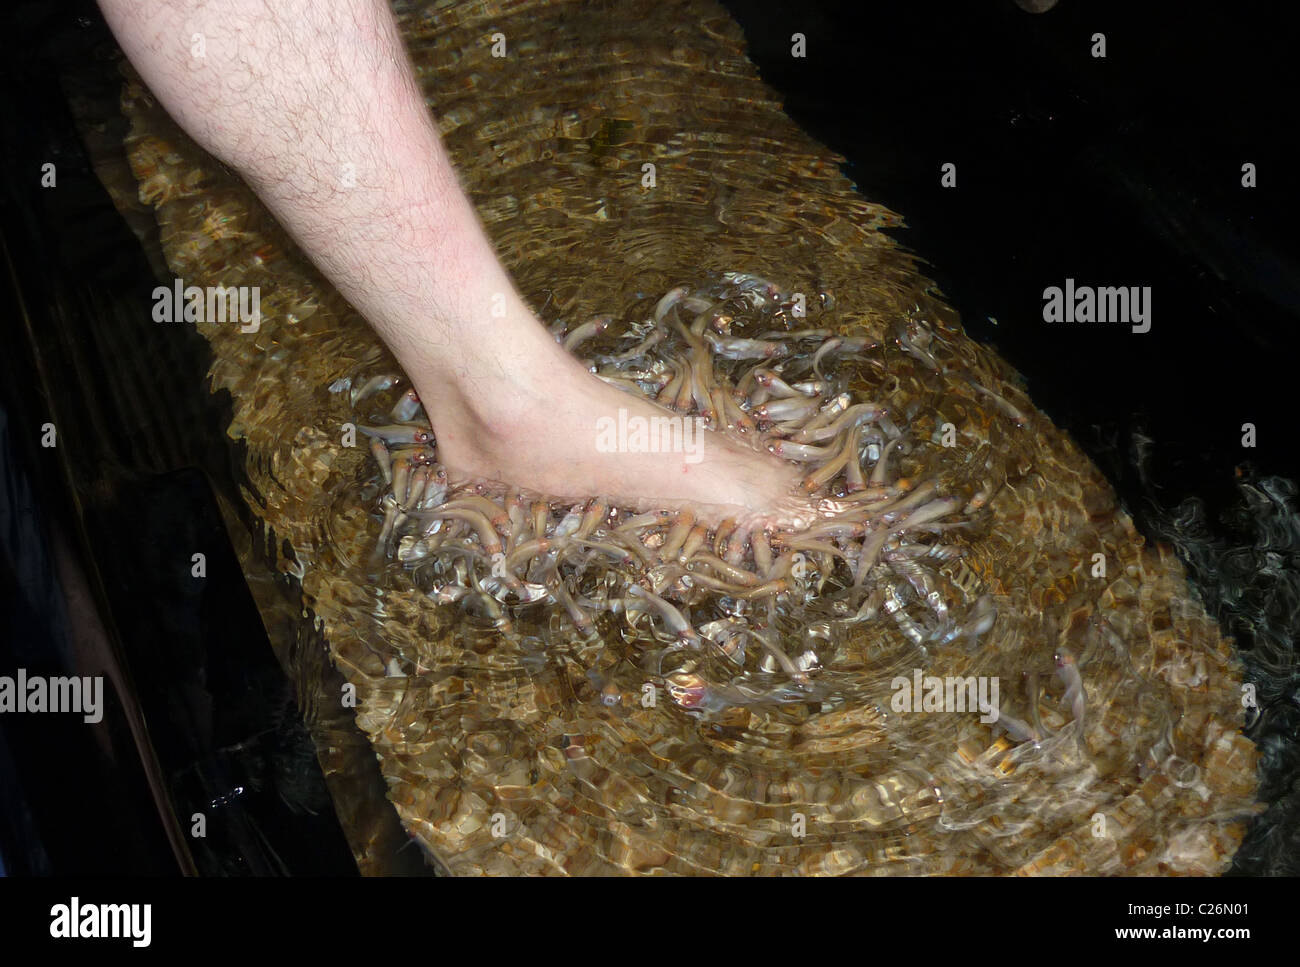 Mans foot in a fish pedicure at a health spa Stock Photo